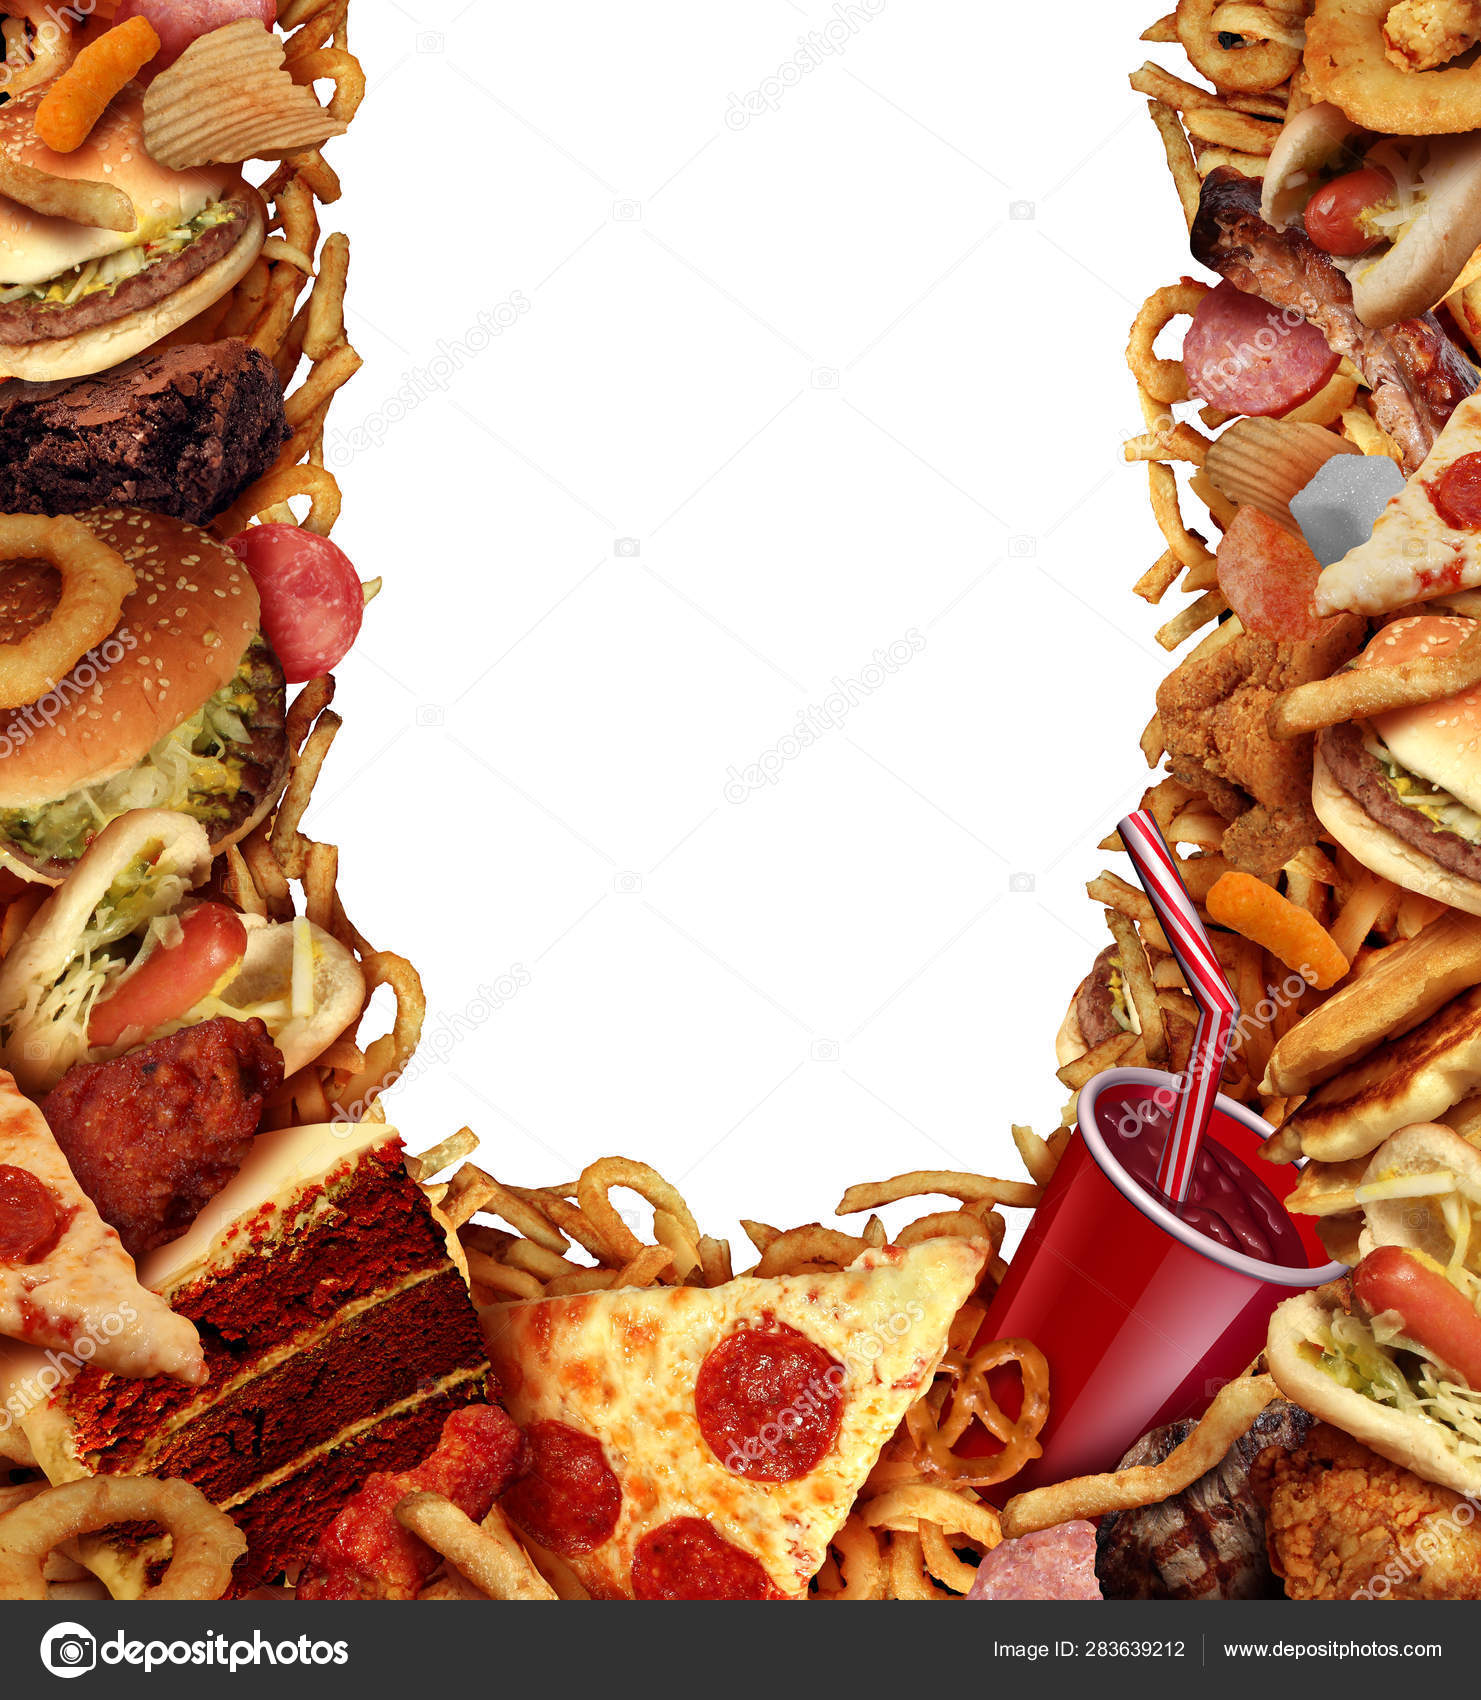 Junk Food Background Frame Stock Photo by ©lightsource 283639212